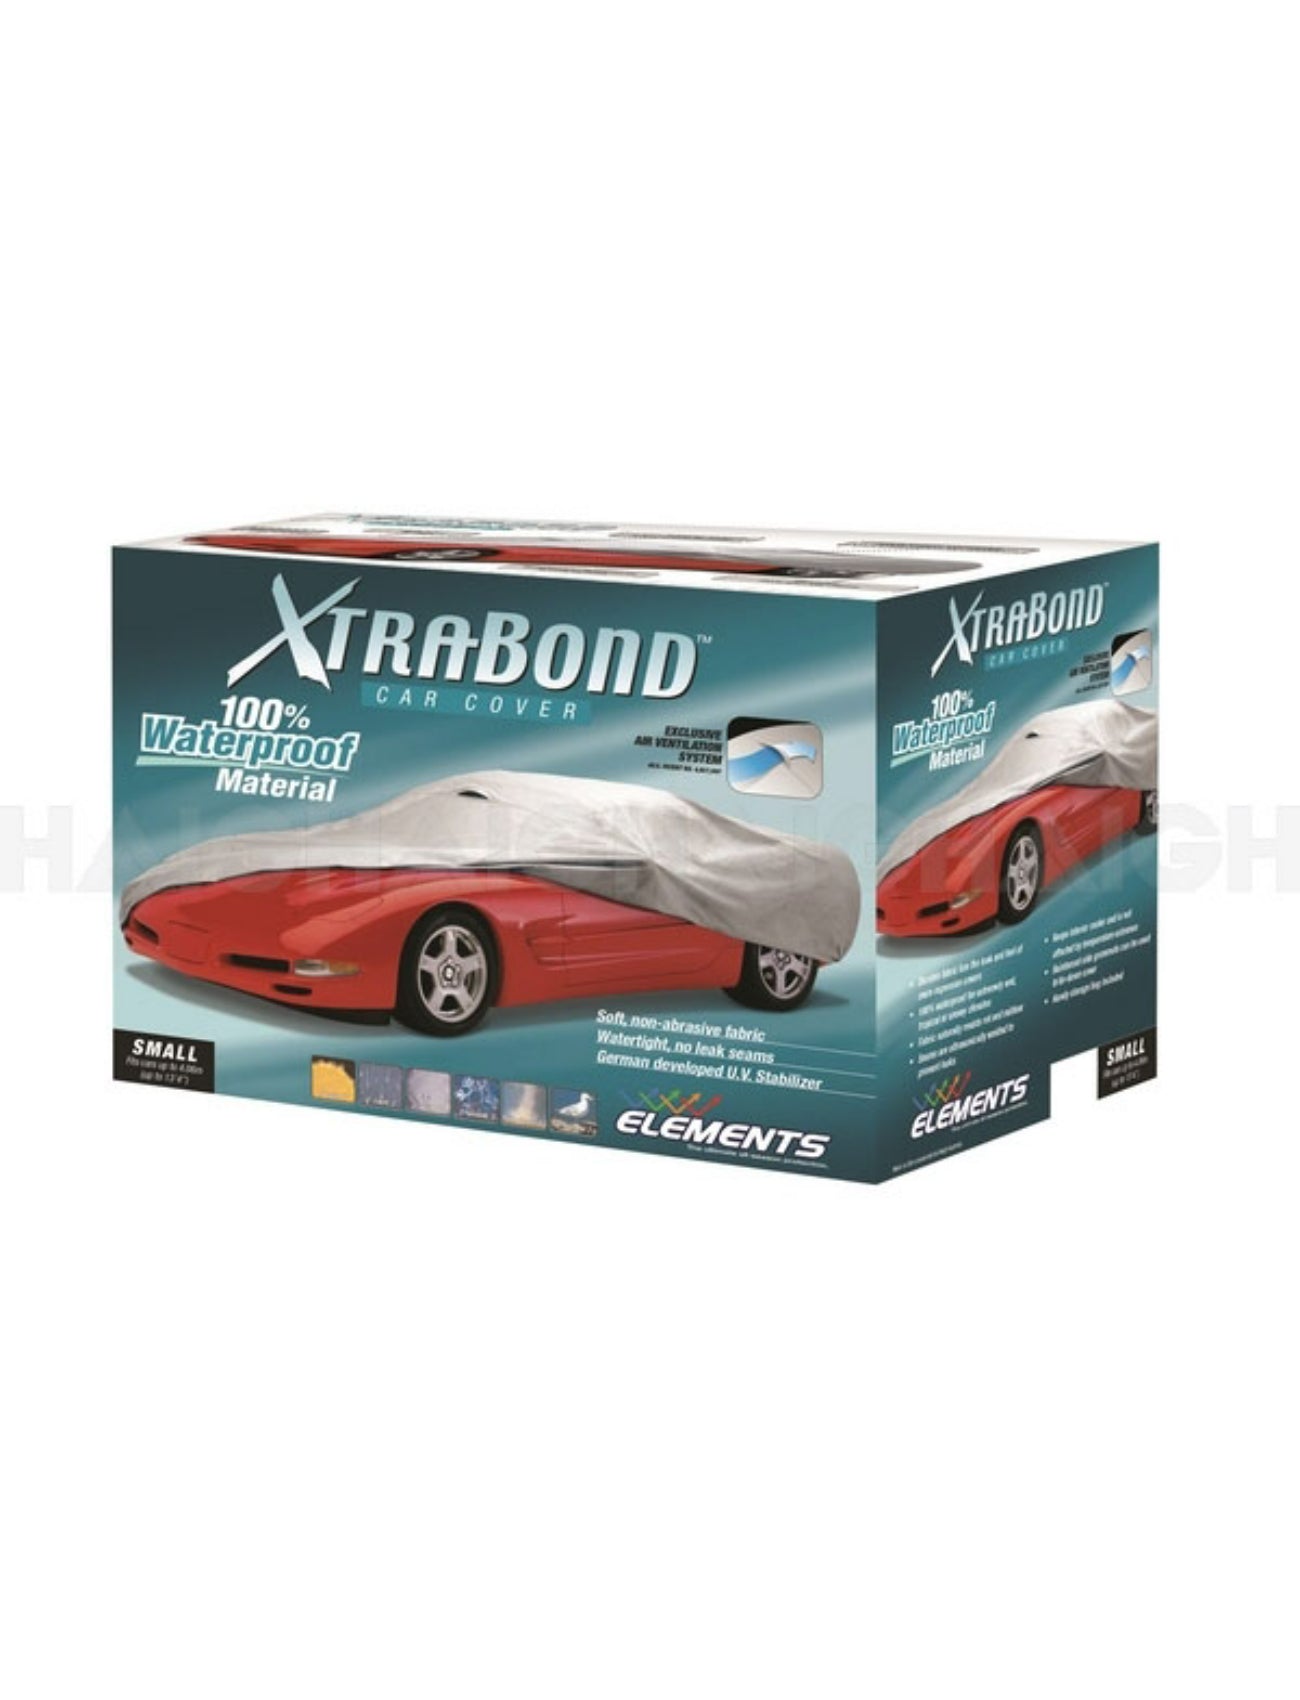 XTRABOND WATERPROOF CAR COVER LARGE